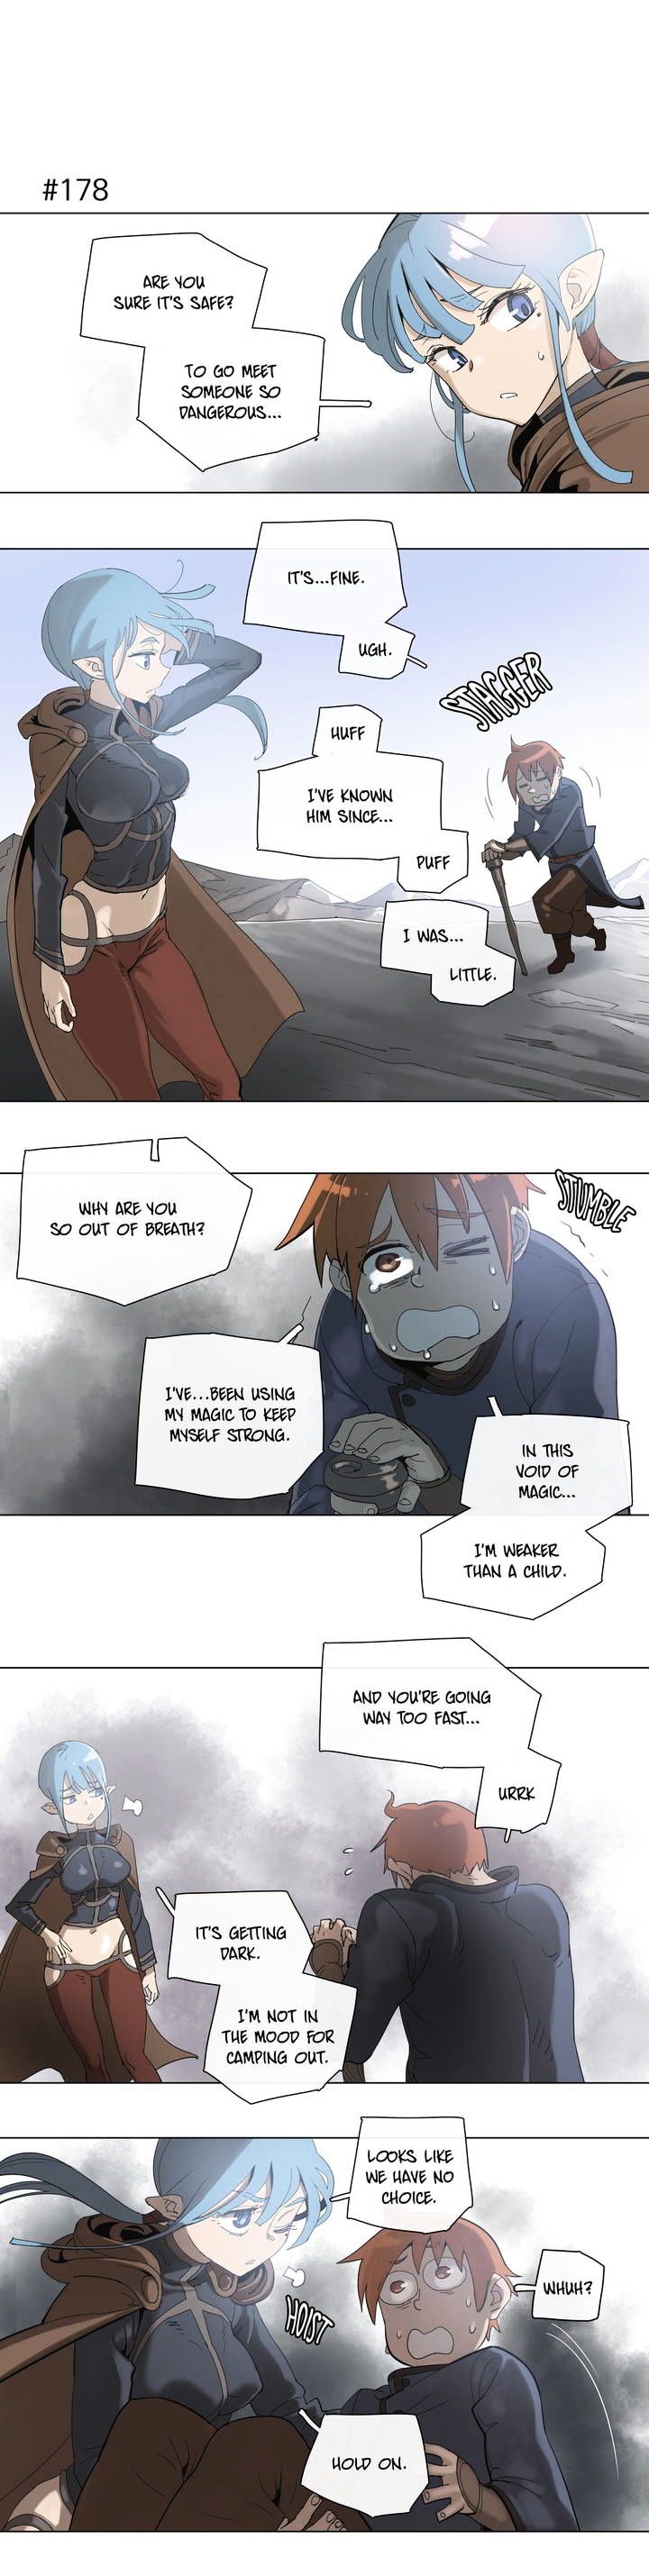 4 Cut Hero Chapter 35 page 2